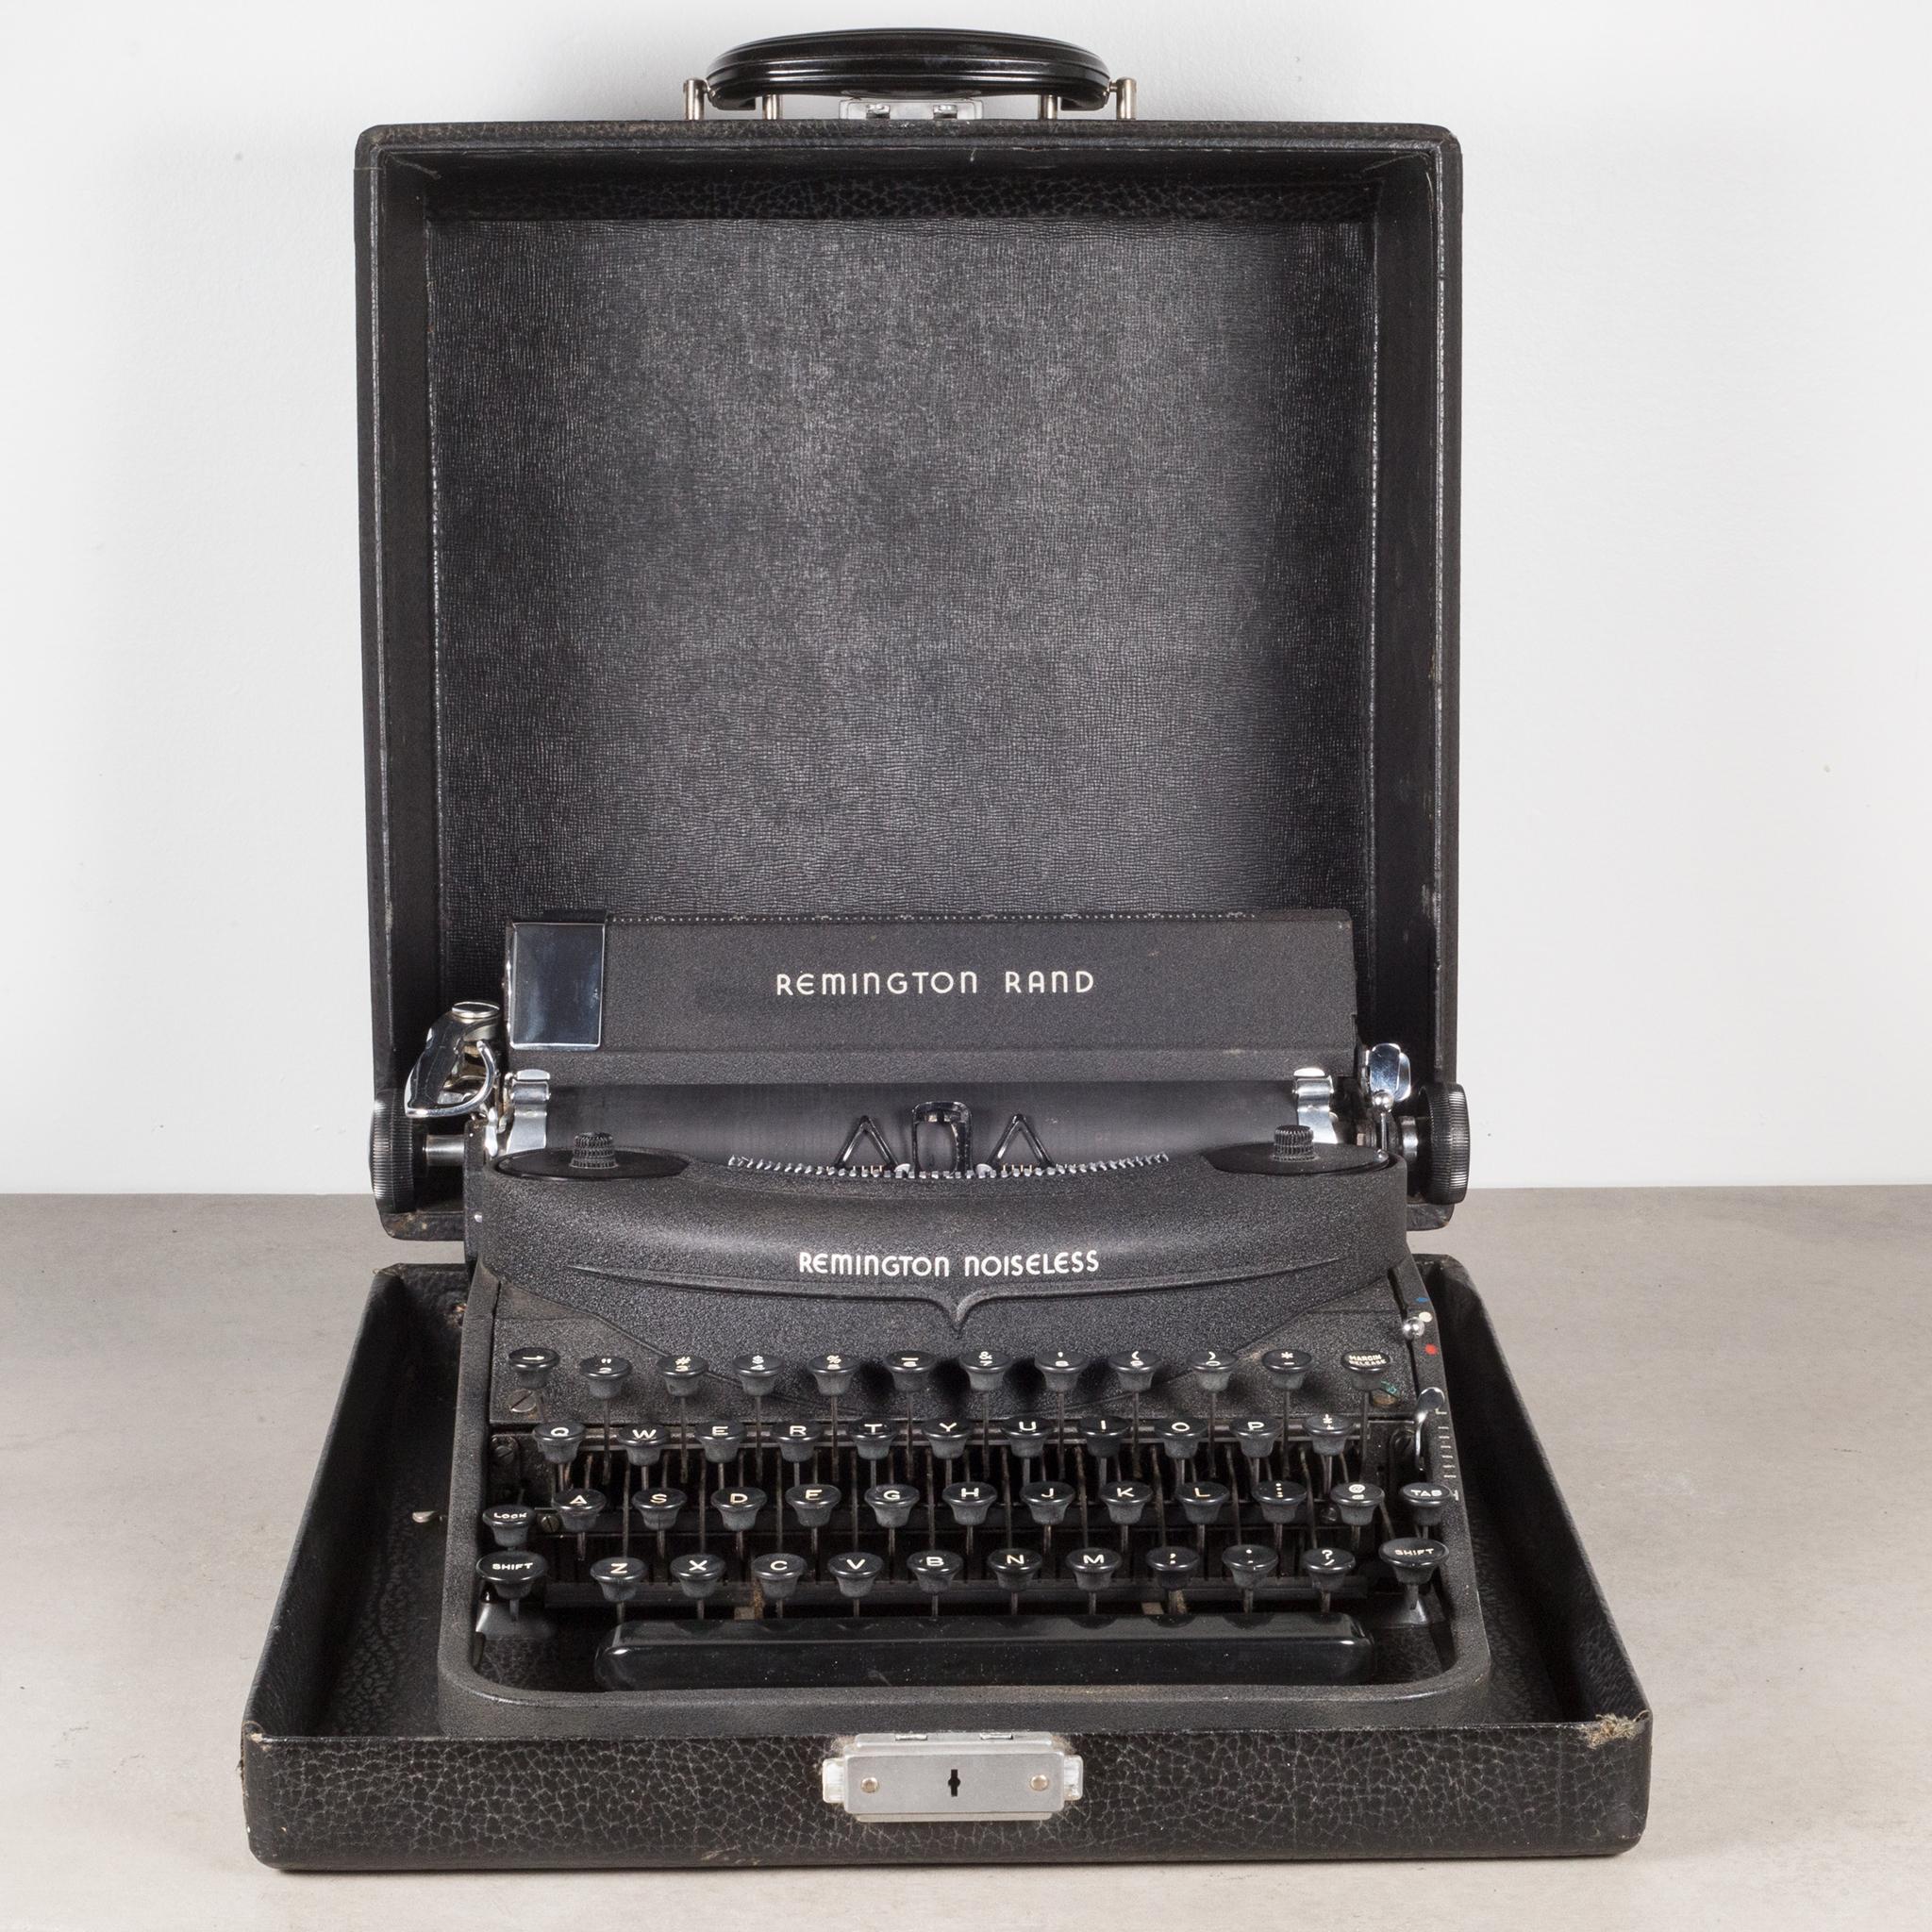 About

An original Remington Rand Portable Noiseless Typewriter with black crinkle finish and original case. This typewriter is very clean and has been fully refurbished. It has smooth typing and the carriage advances and functions very well. The